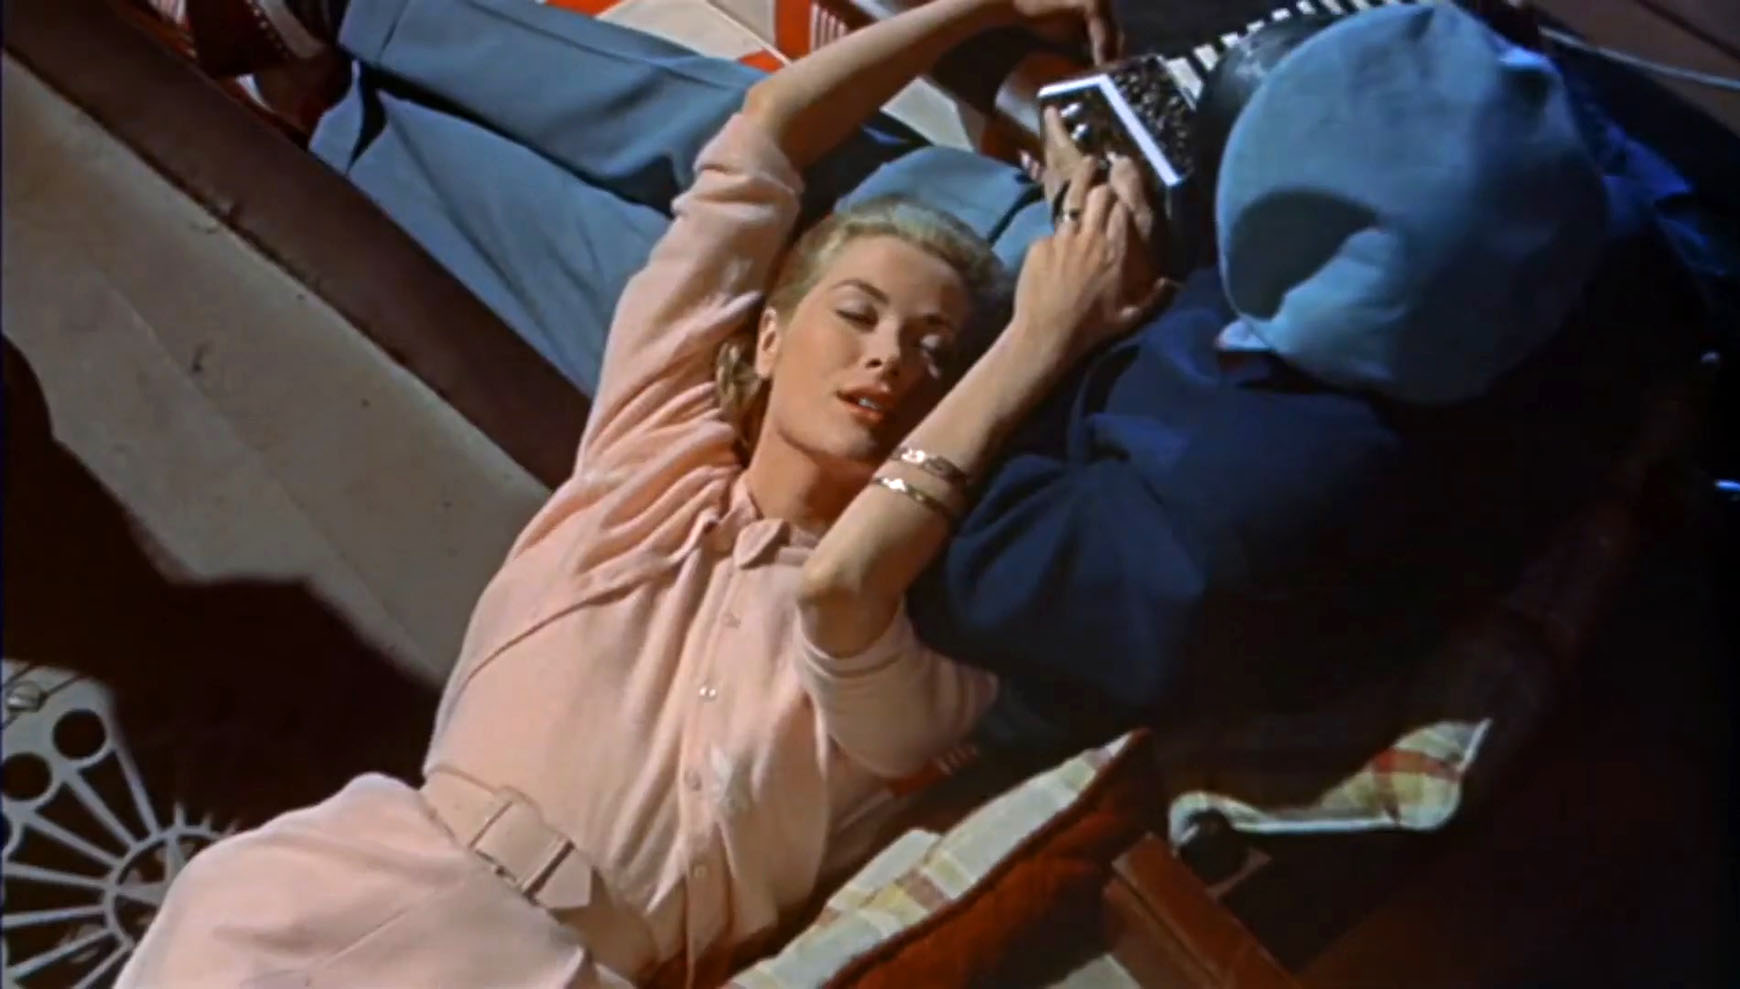 [Grace Kelly in the trailer for High Society]